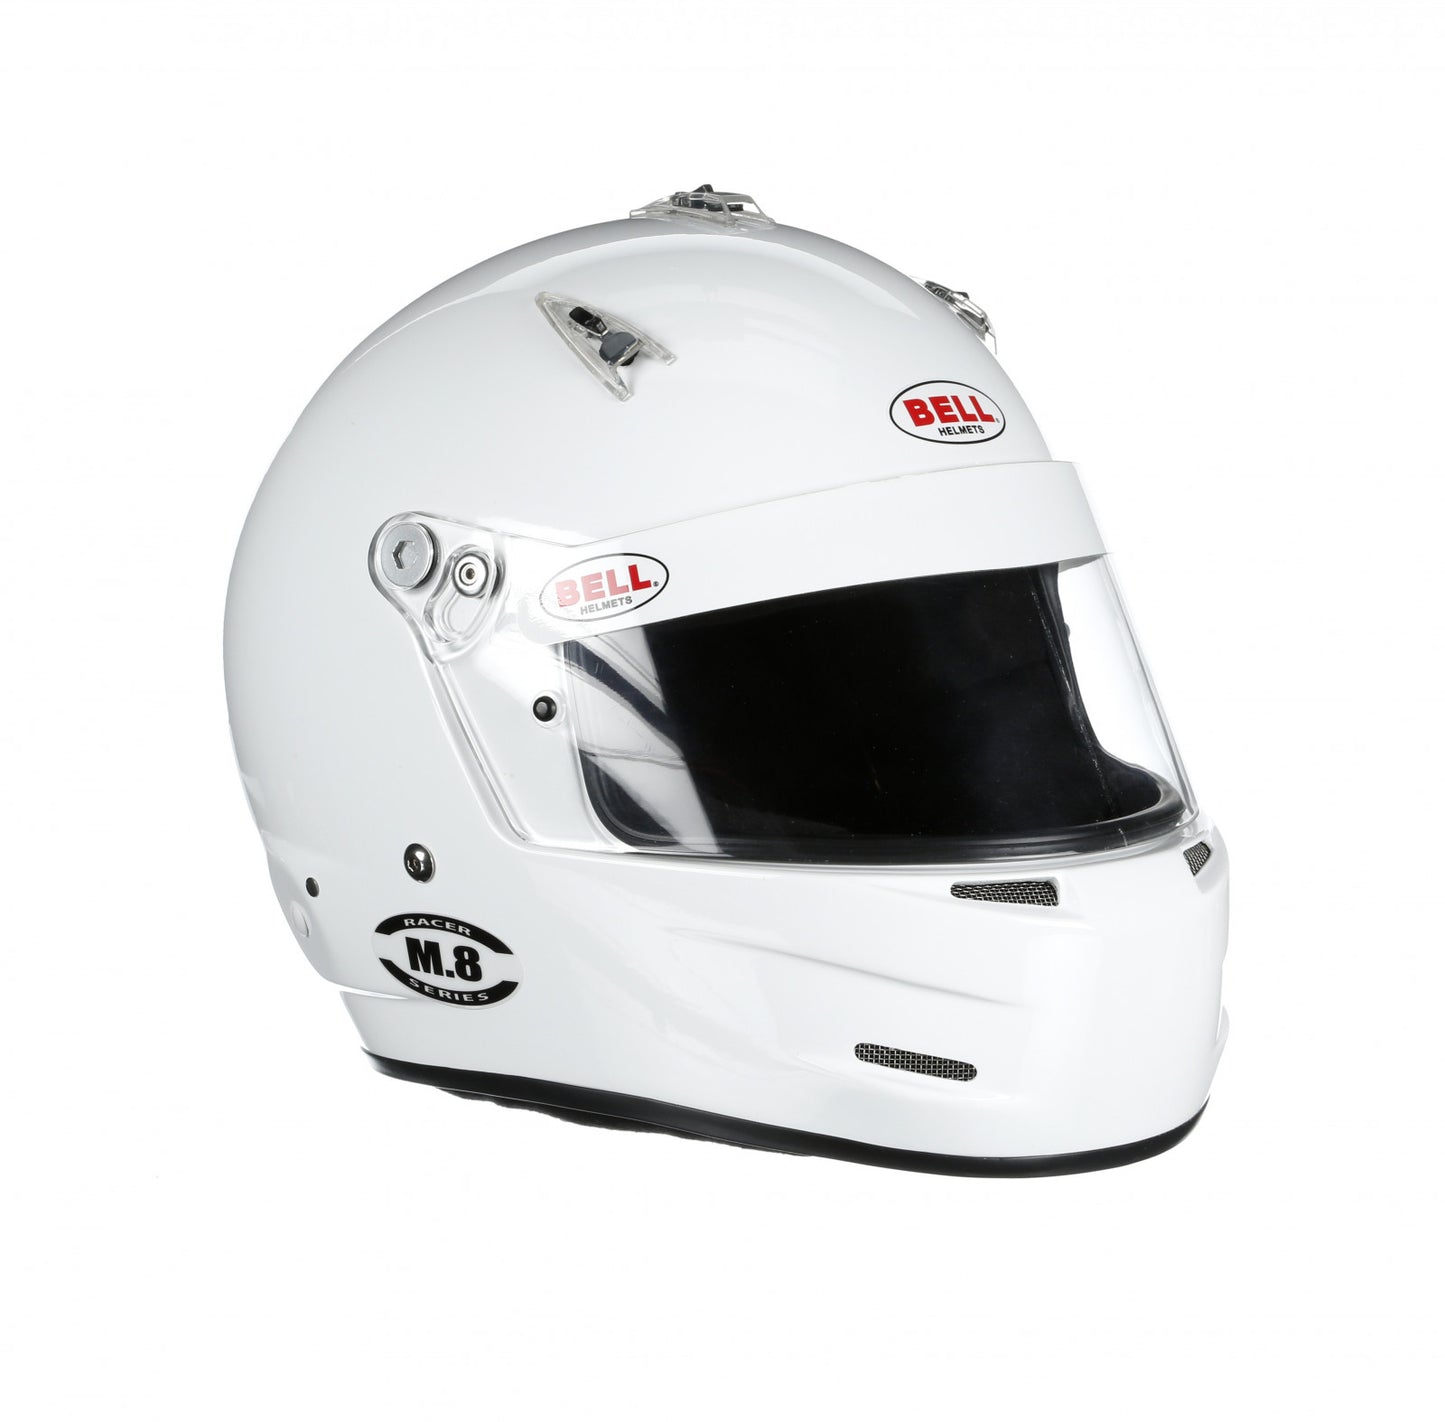 Bell M8 Racing Helmet-White Size Large